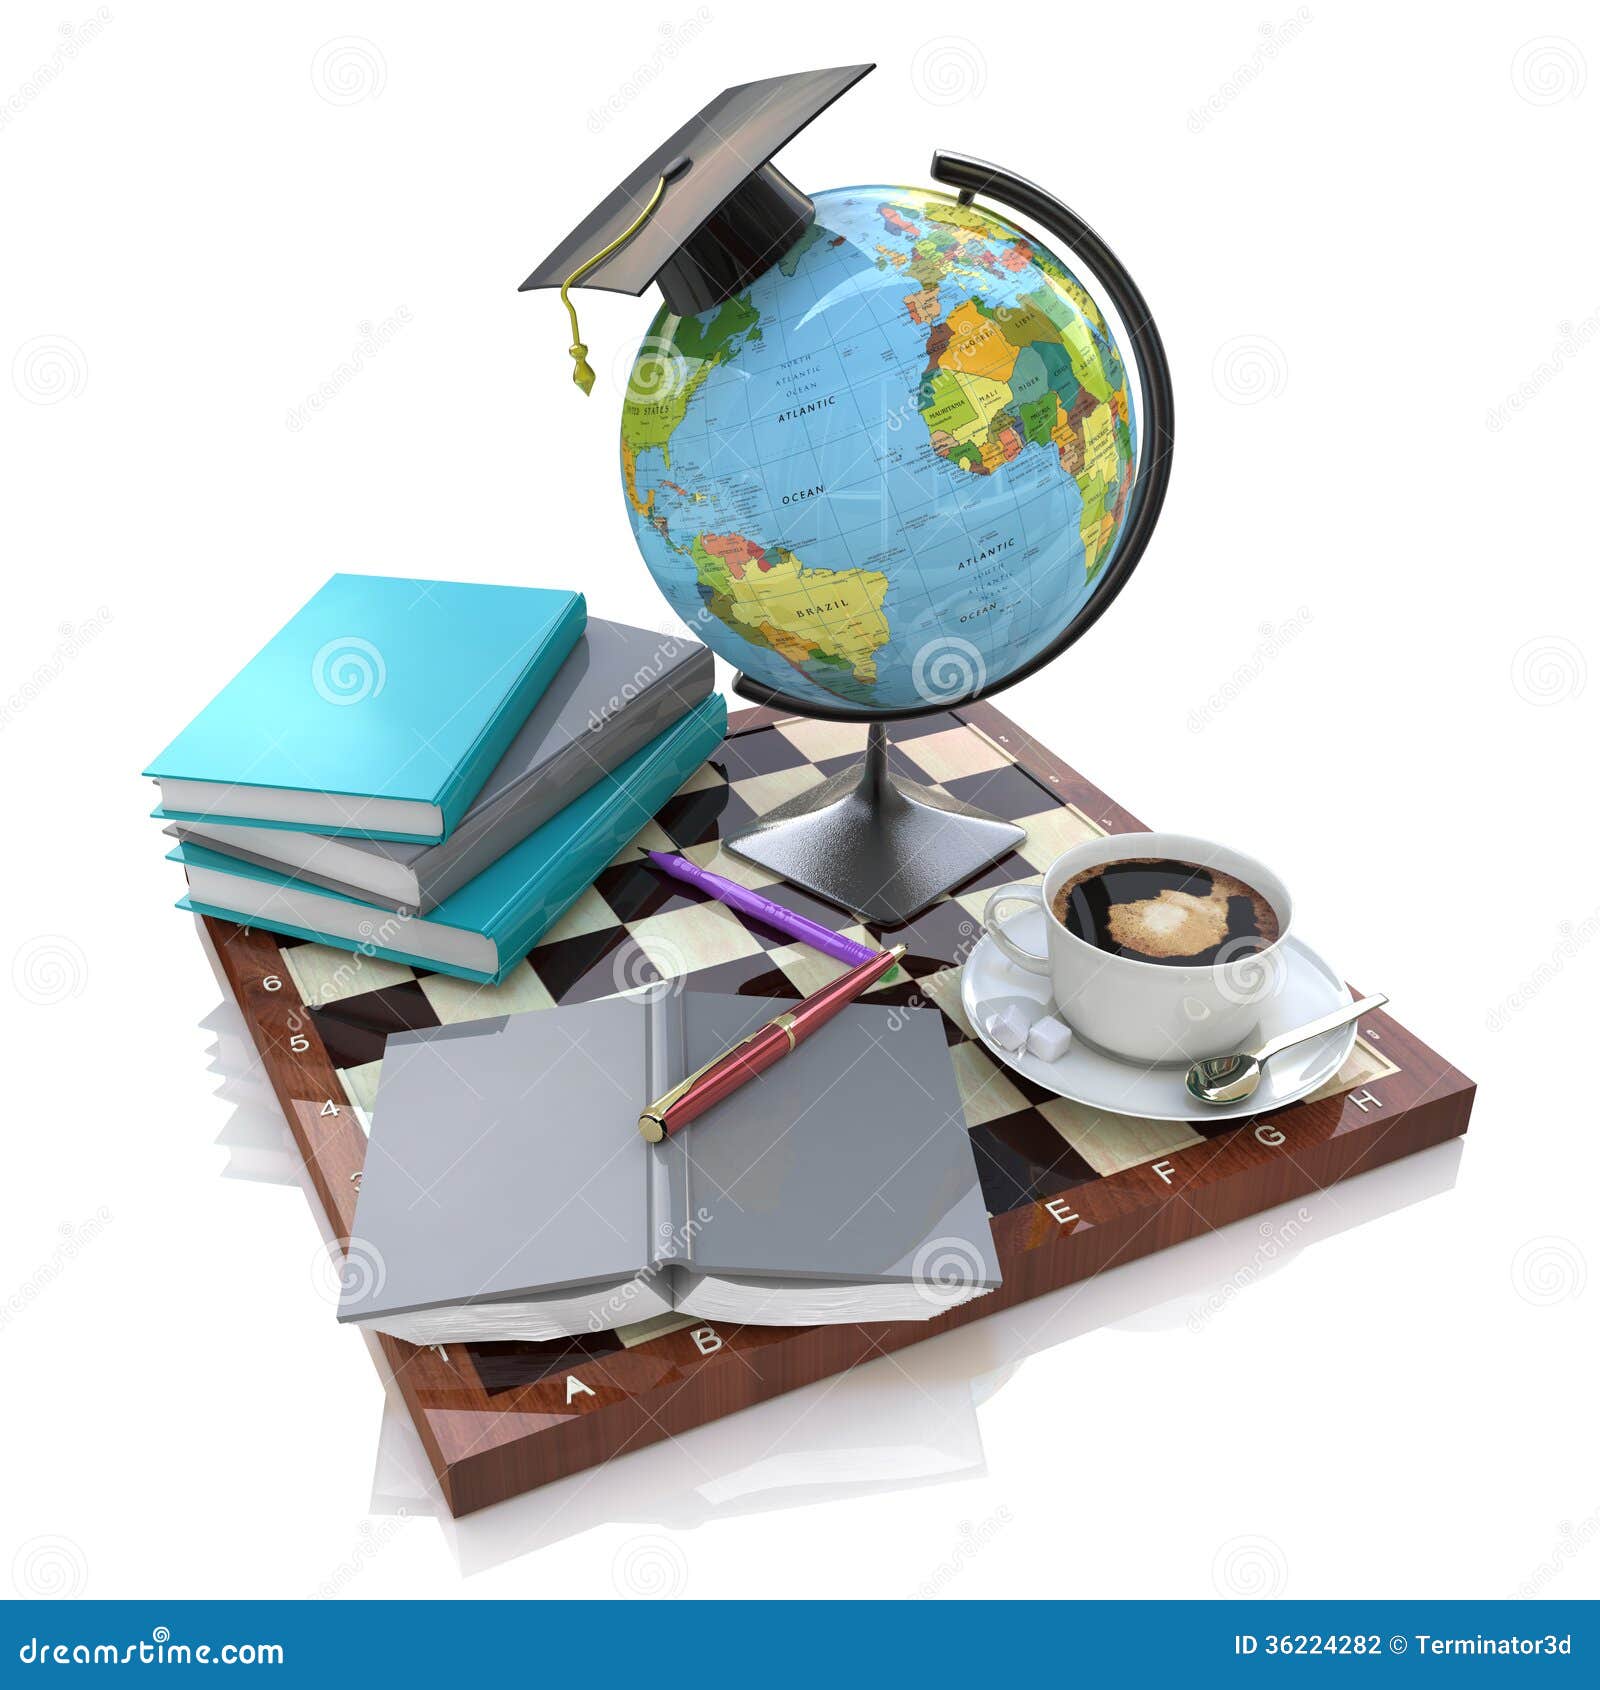 clipart related to education - photo #46